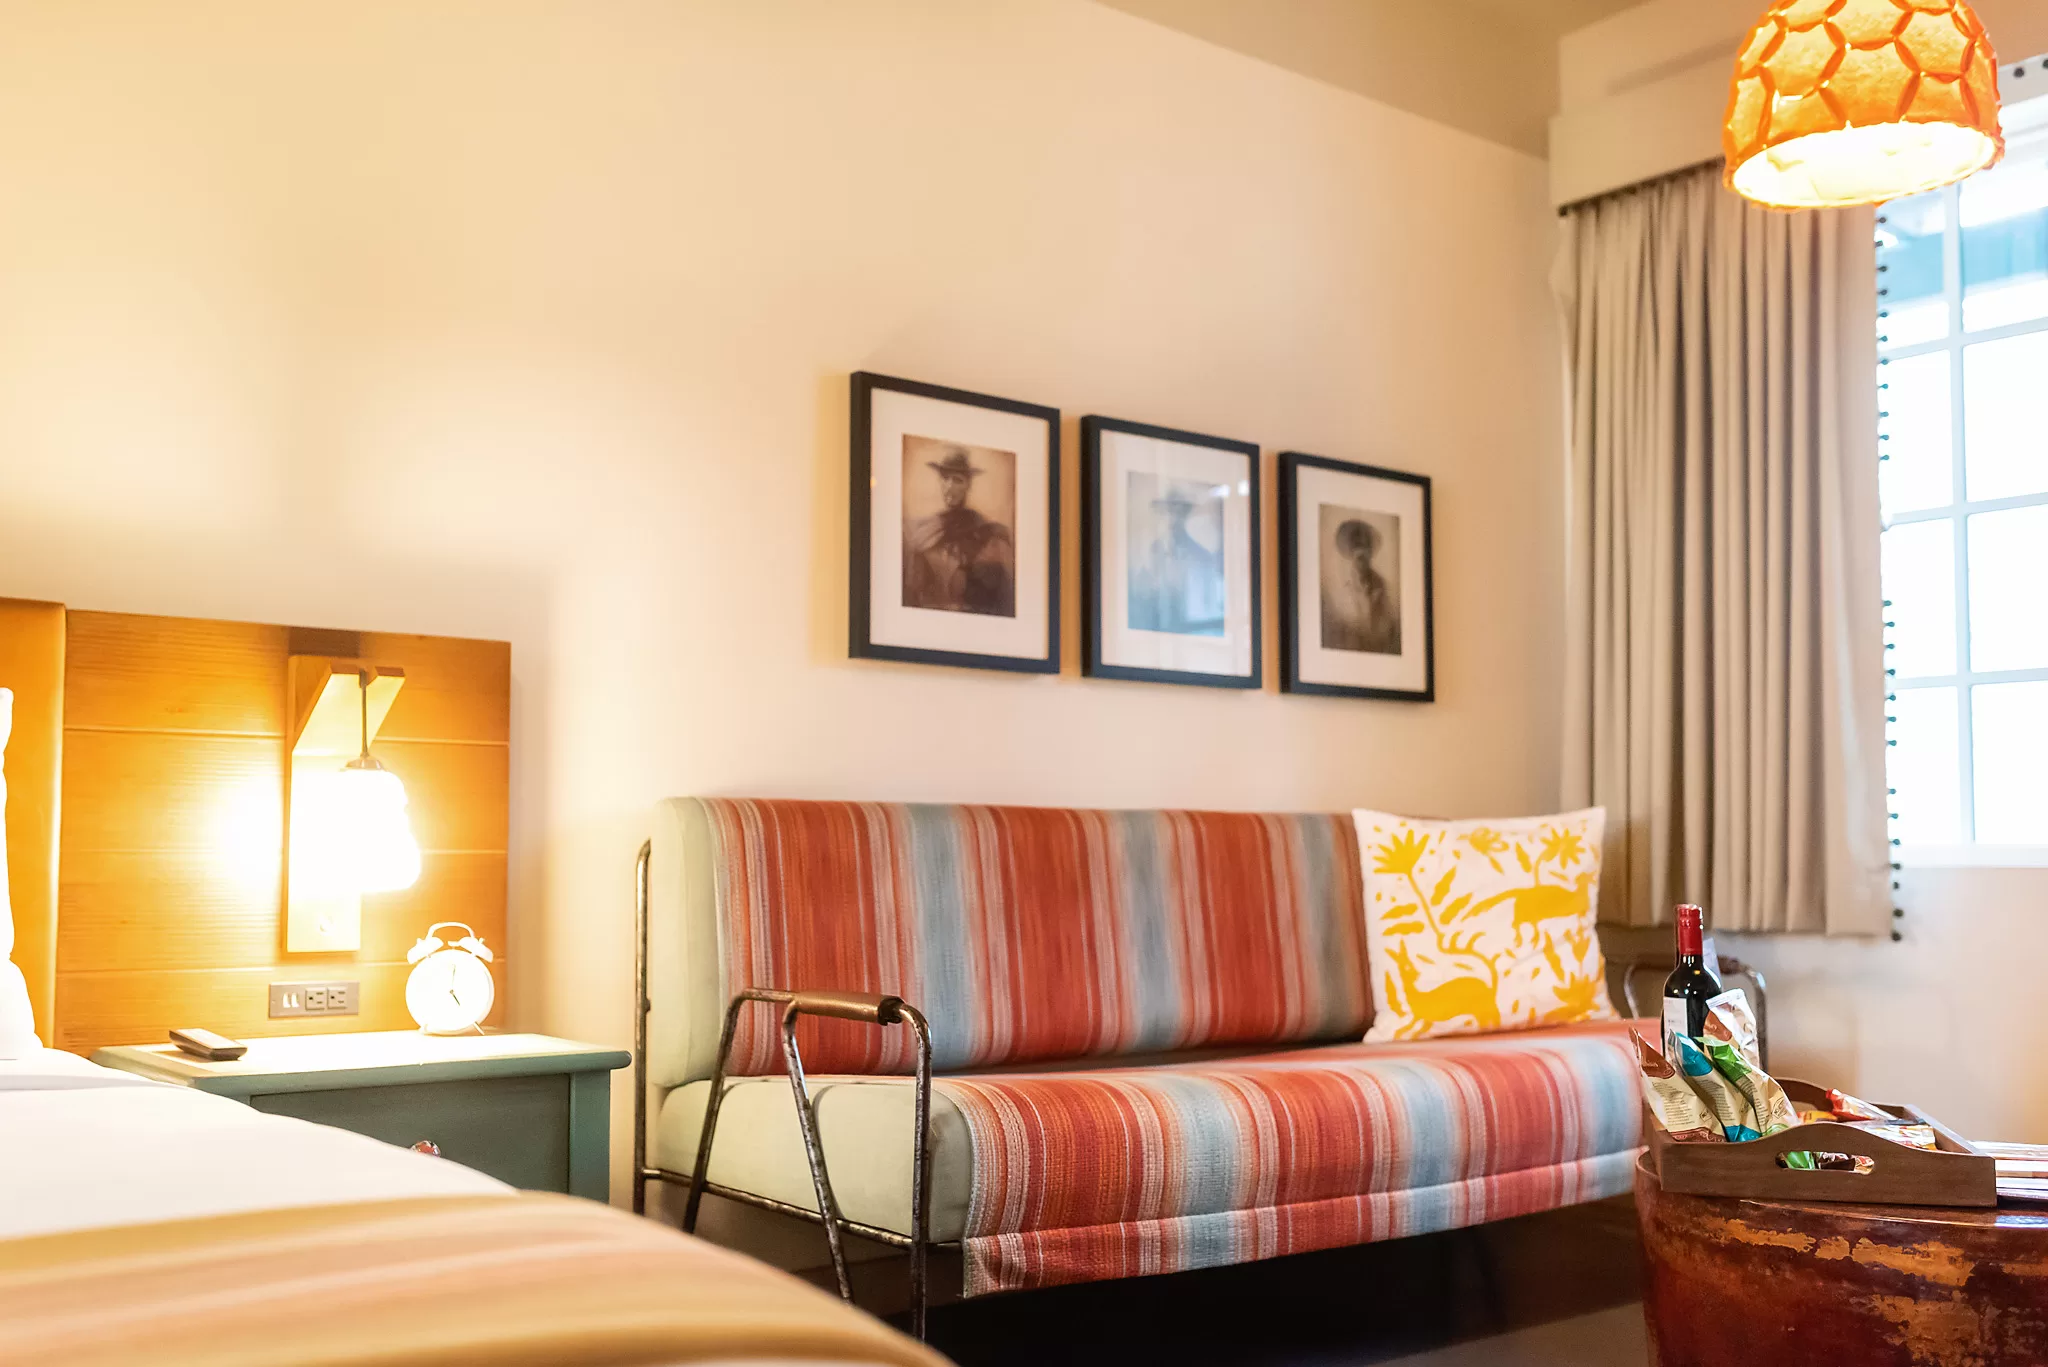 Couch covered in bright textiles with three western photos hung above it in a guestroom at the Texican Court Hotel